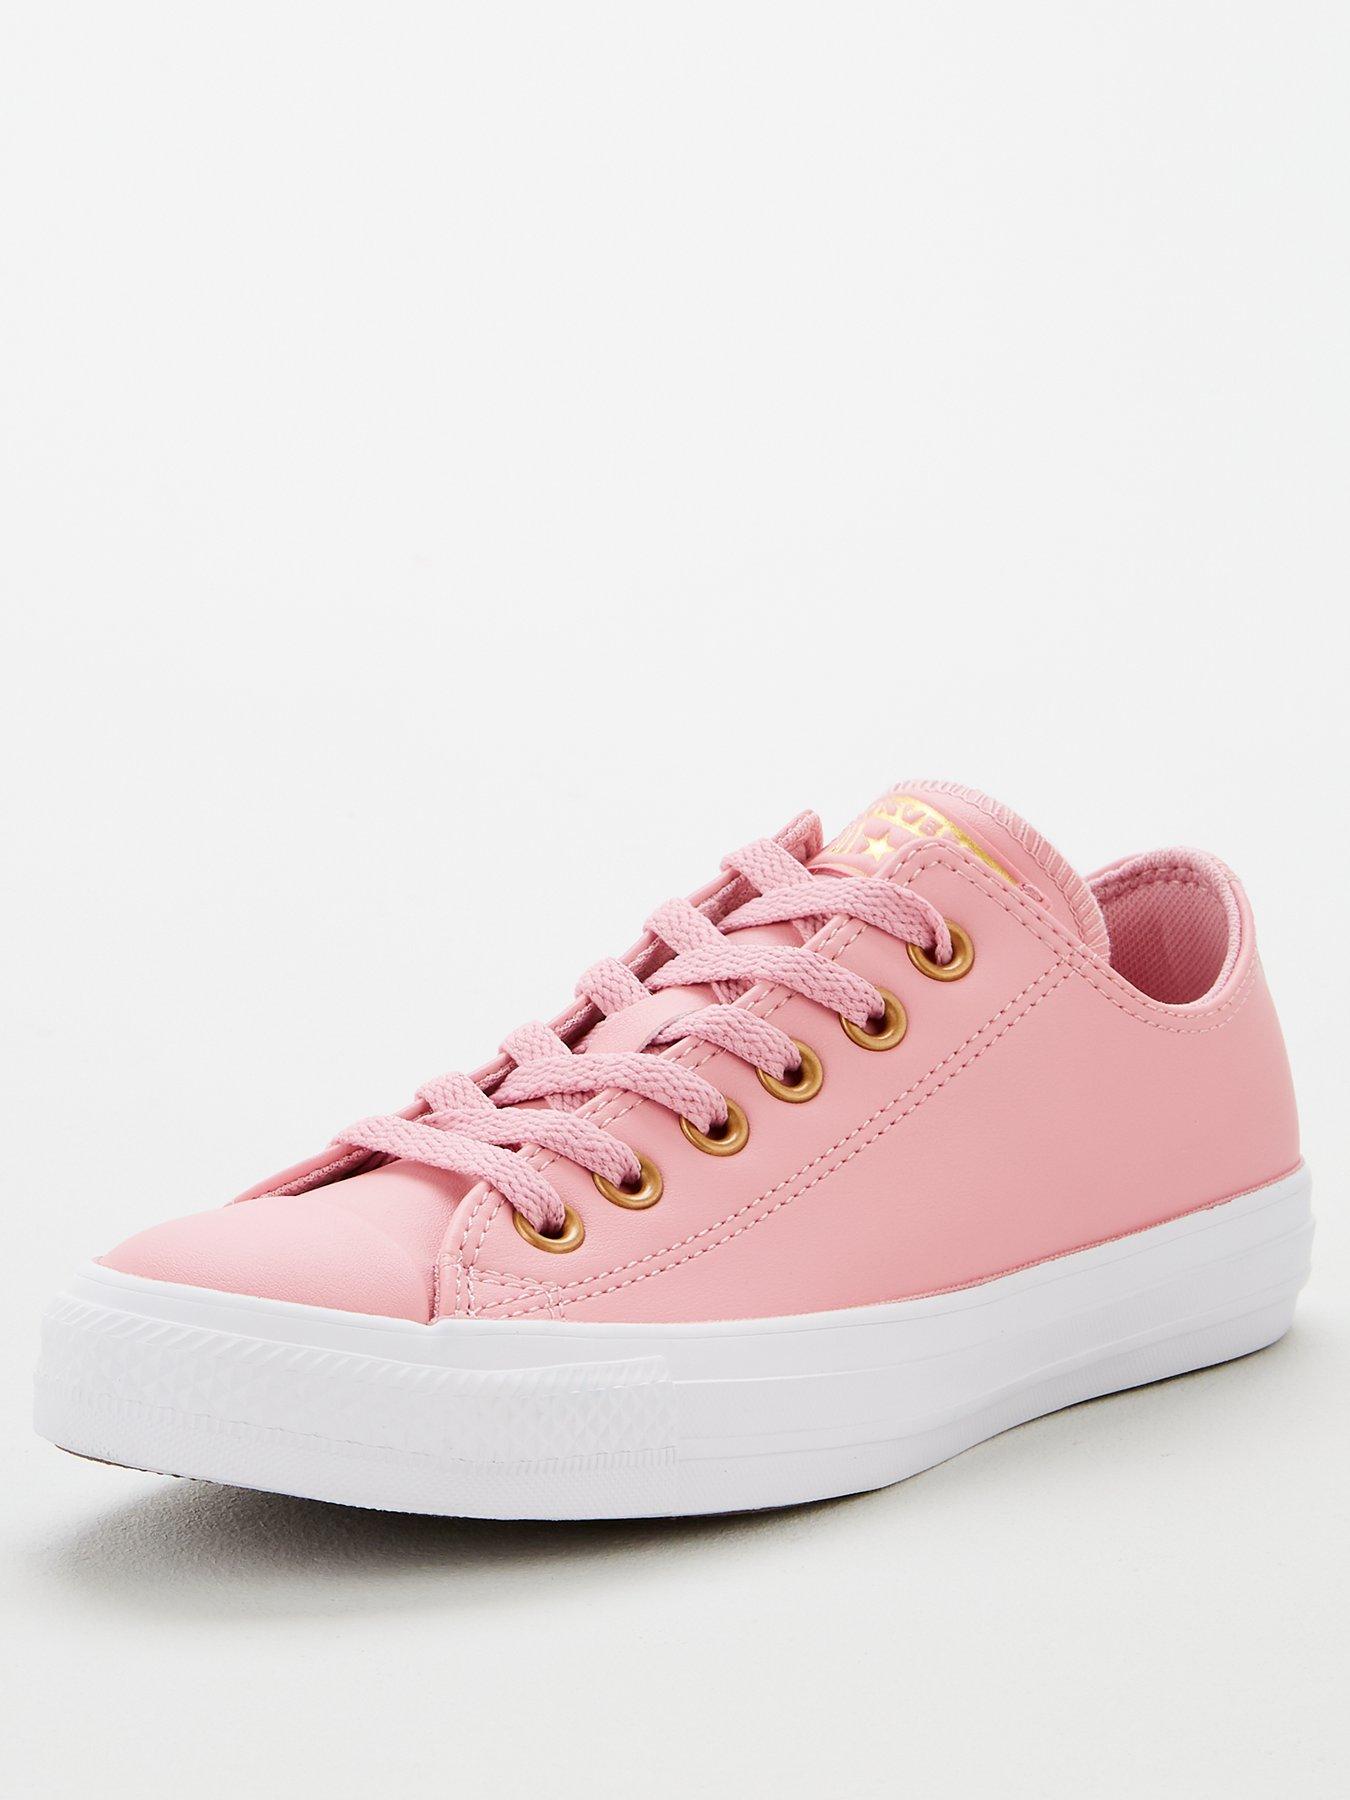 converse chuck taylor all star ox plimsolls in pink